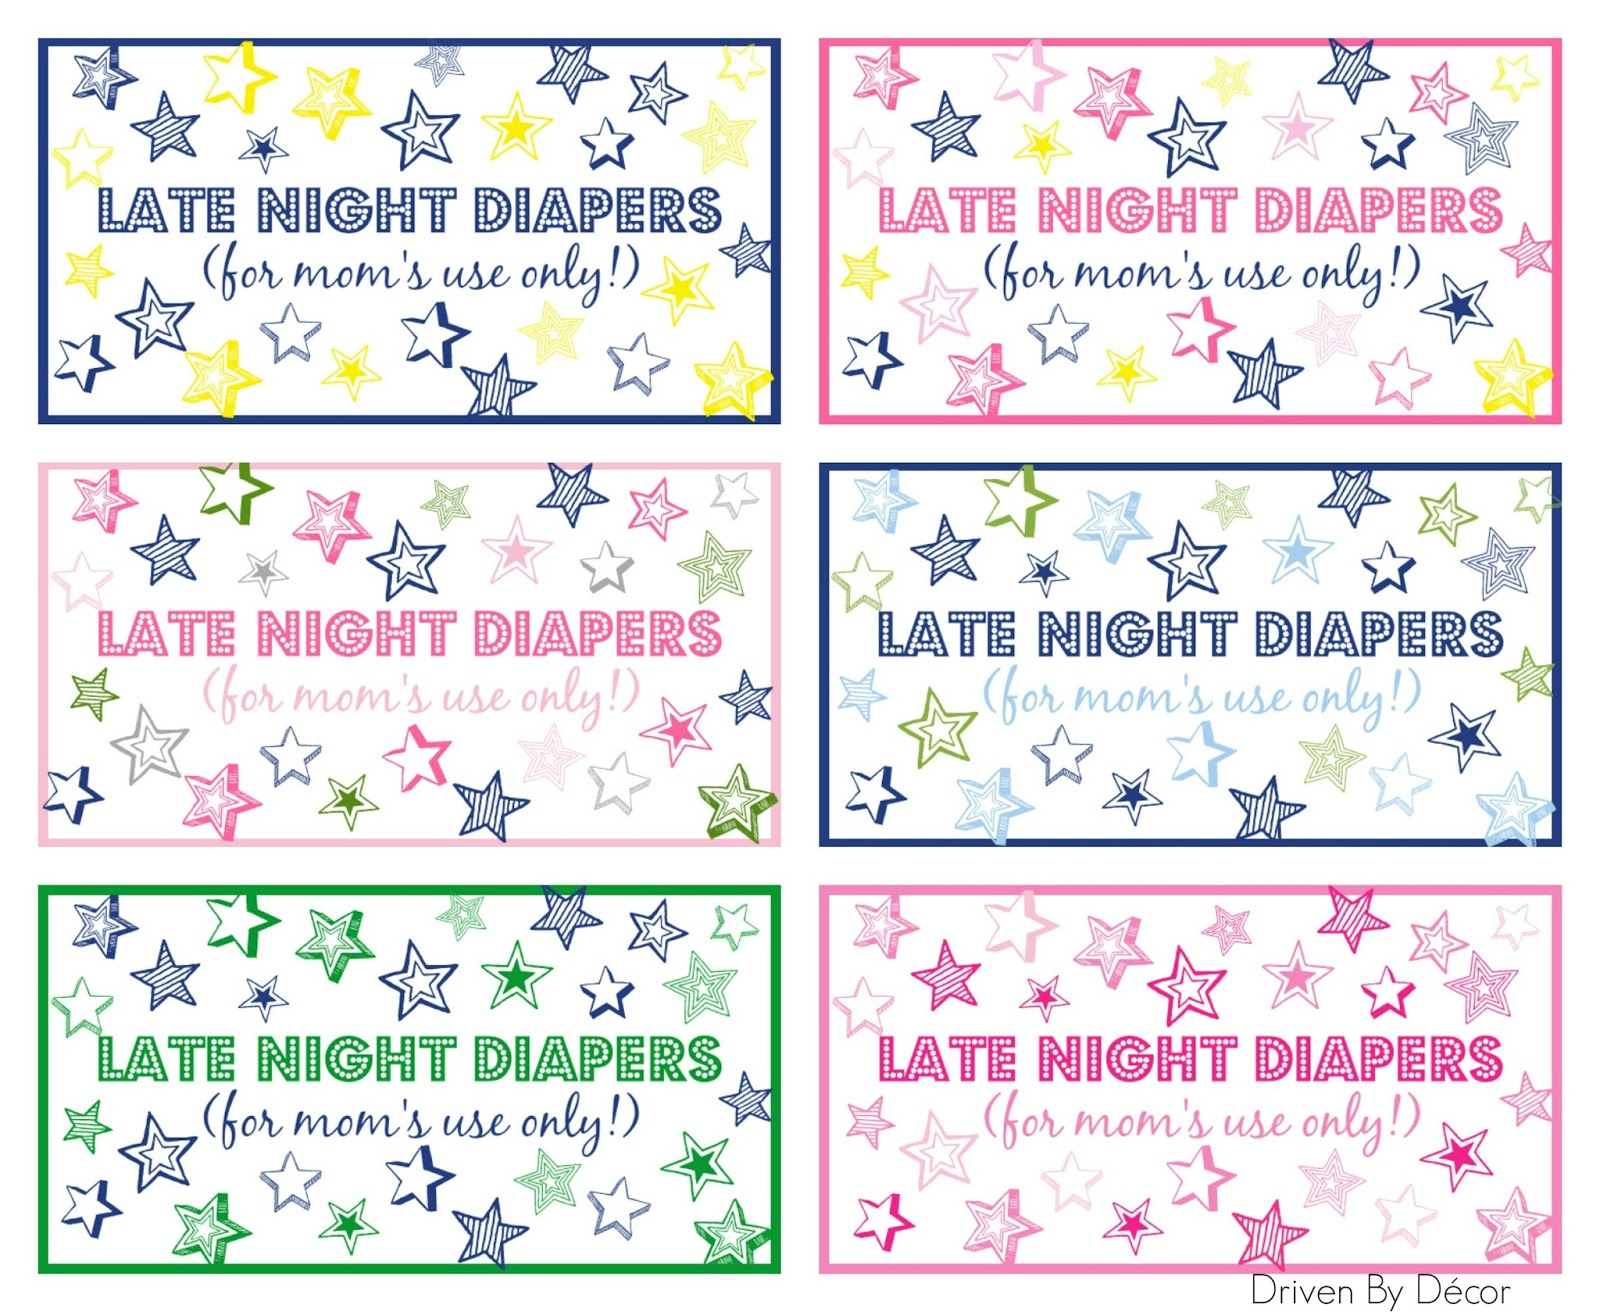 Late Night Diapers Baby Shower Printables - Drivendecor - Free Printable Late Night Diaper Sign